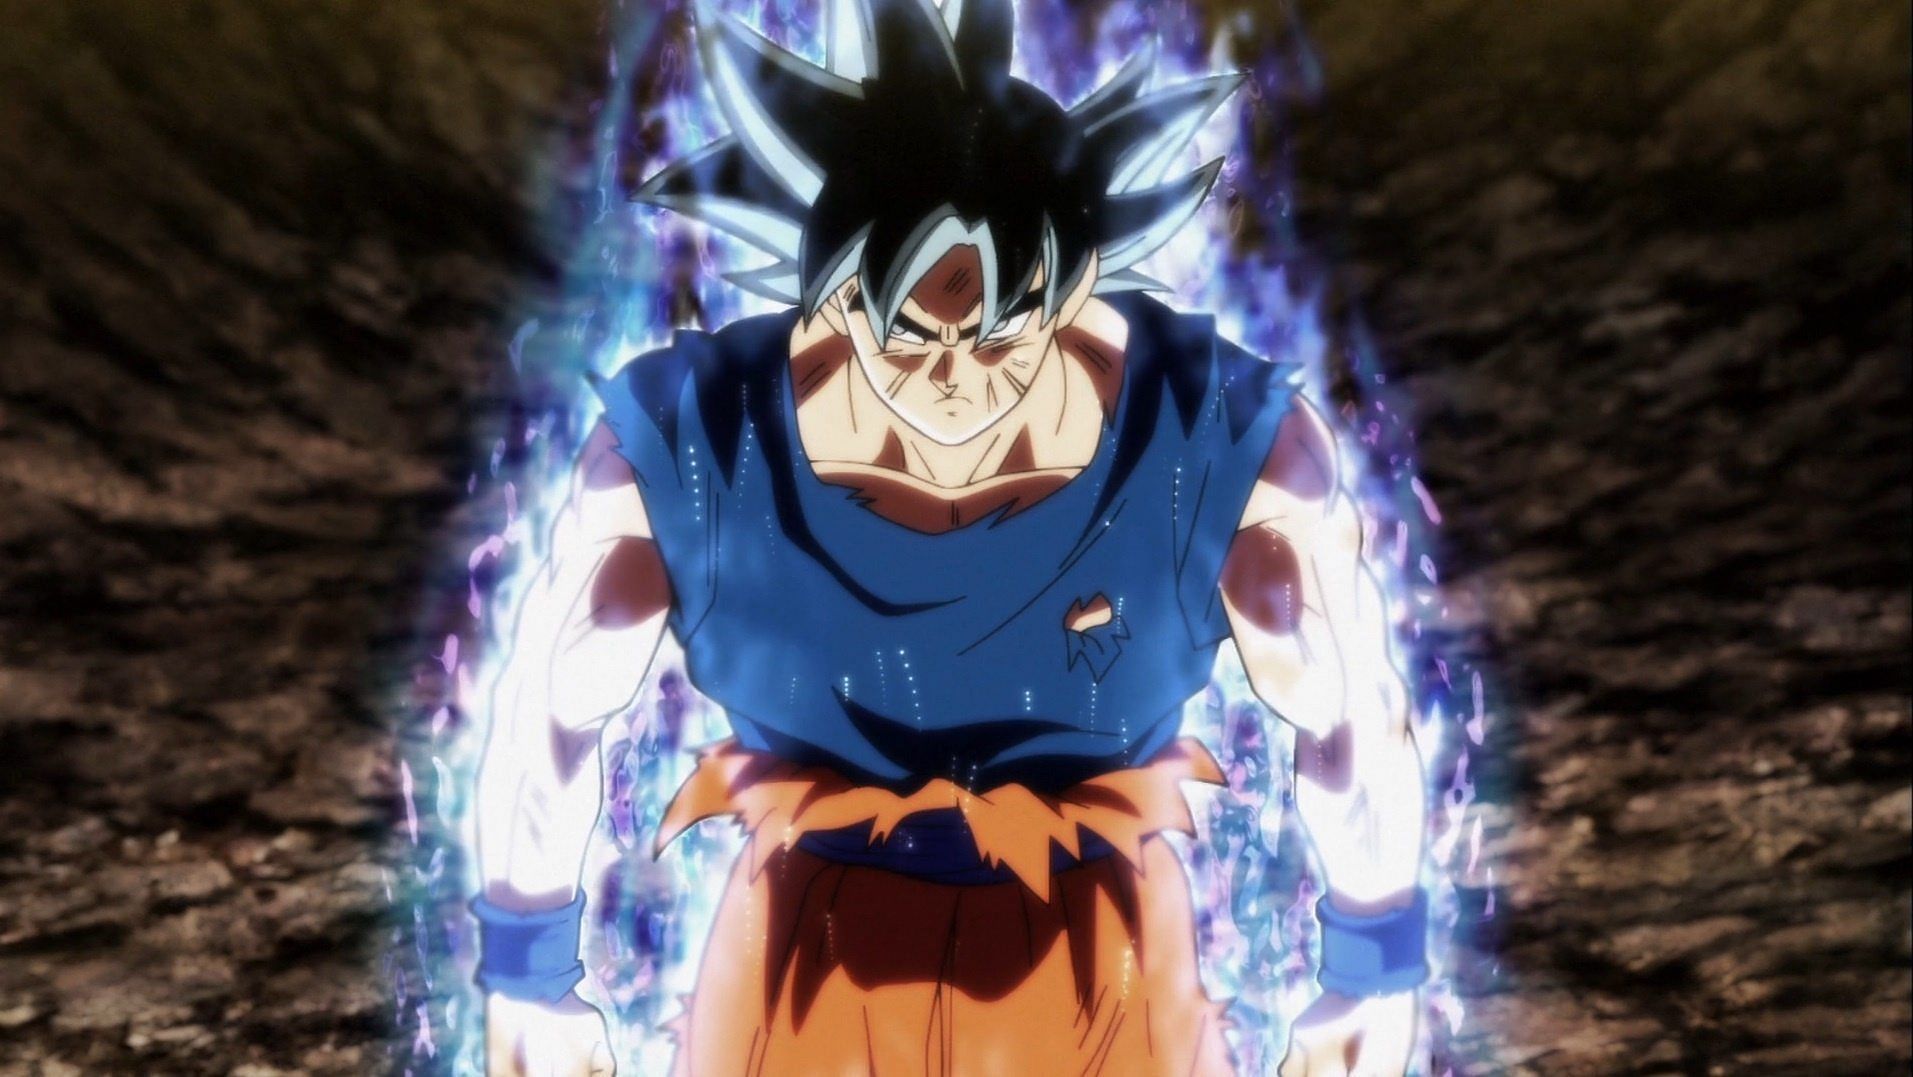 Goku in his Imperfect Ultra Instinct form, as seen in Dragon Ball Super&#039;s Tournament of Power anime arc. (Image via Toei Animation)